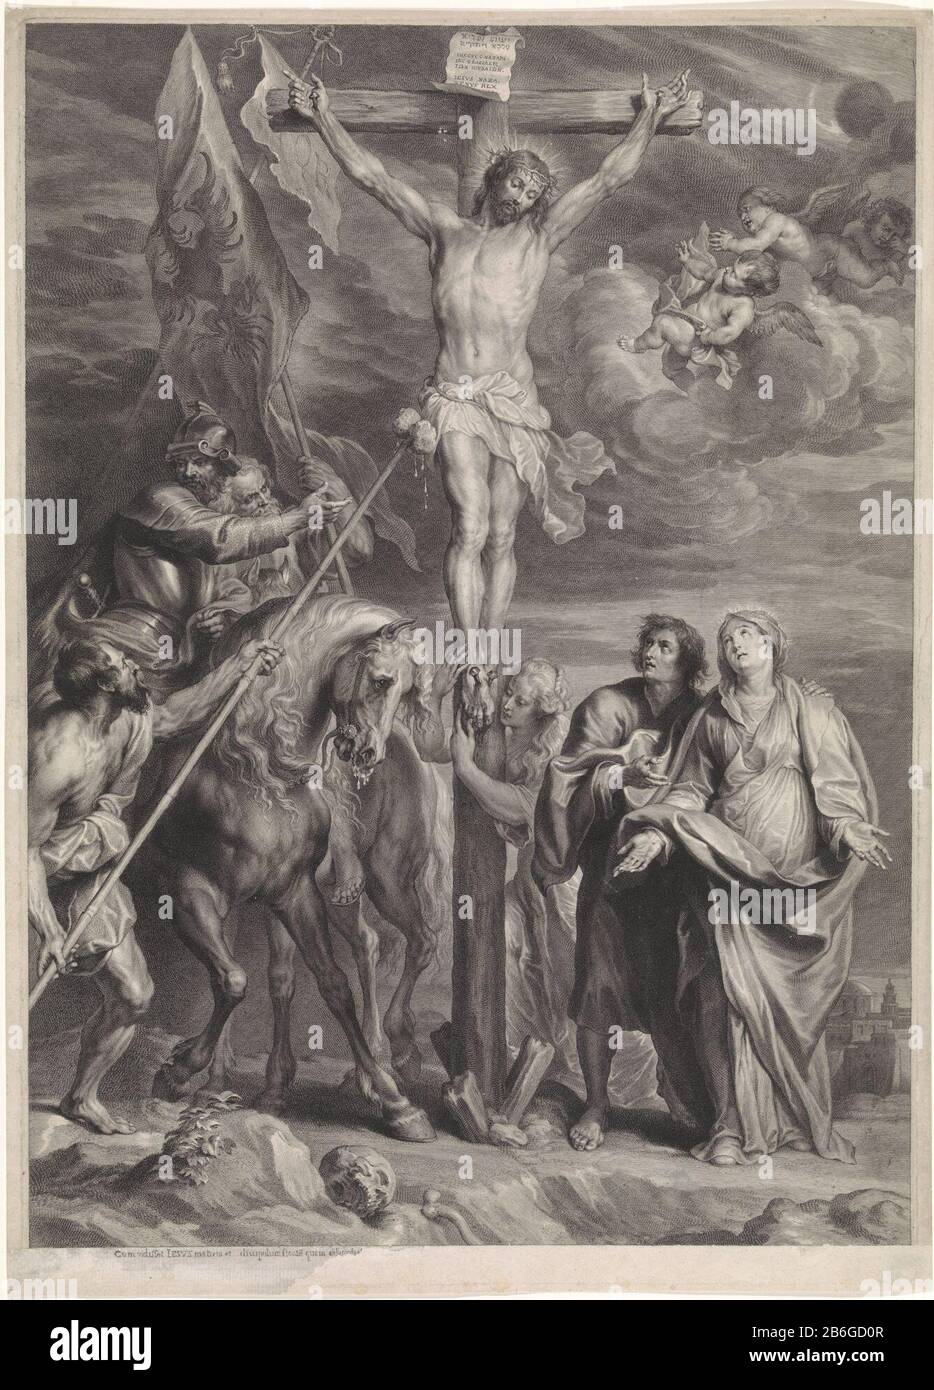 Christ on the Cross with Mary, John, Mary Magdalene and soldiers Christ on the cross with Mary, John, Mary Magdalene and soldiers. In the margin under a condition fragment from Bible John 19. Manufacturer : print maker: Schelte Adamsz. Bolswertnaar painting by Anthony van Dyck Dated: 1596 - 1659 Physical features: engra and pen in gray material: paper Technique: engra (printing process) / pen Dimensions: sheet: H 643 mm × W 463 mmToelichtingPrent to painting by Anthony van Dyck. The blade is restored Where: applied in duplicate and part of the title of the post in the fourth state with pen in Stock Photo